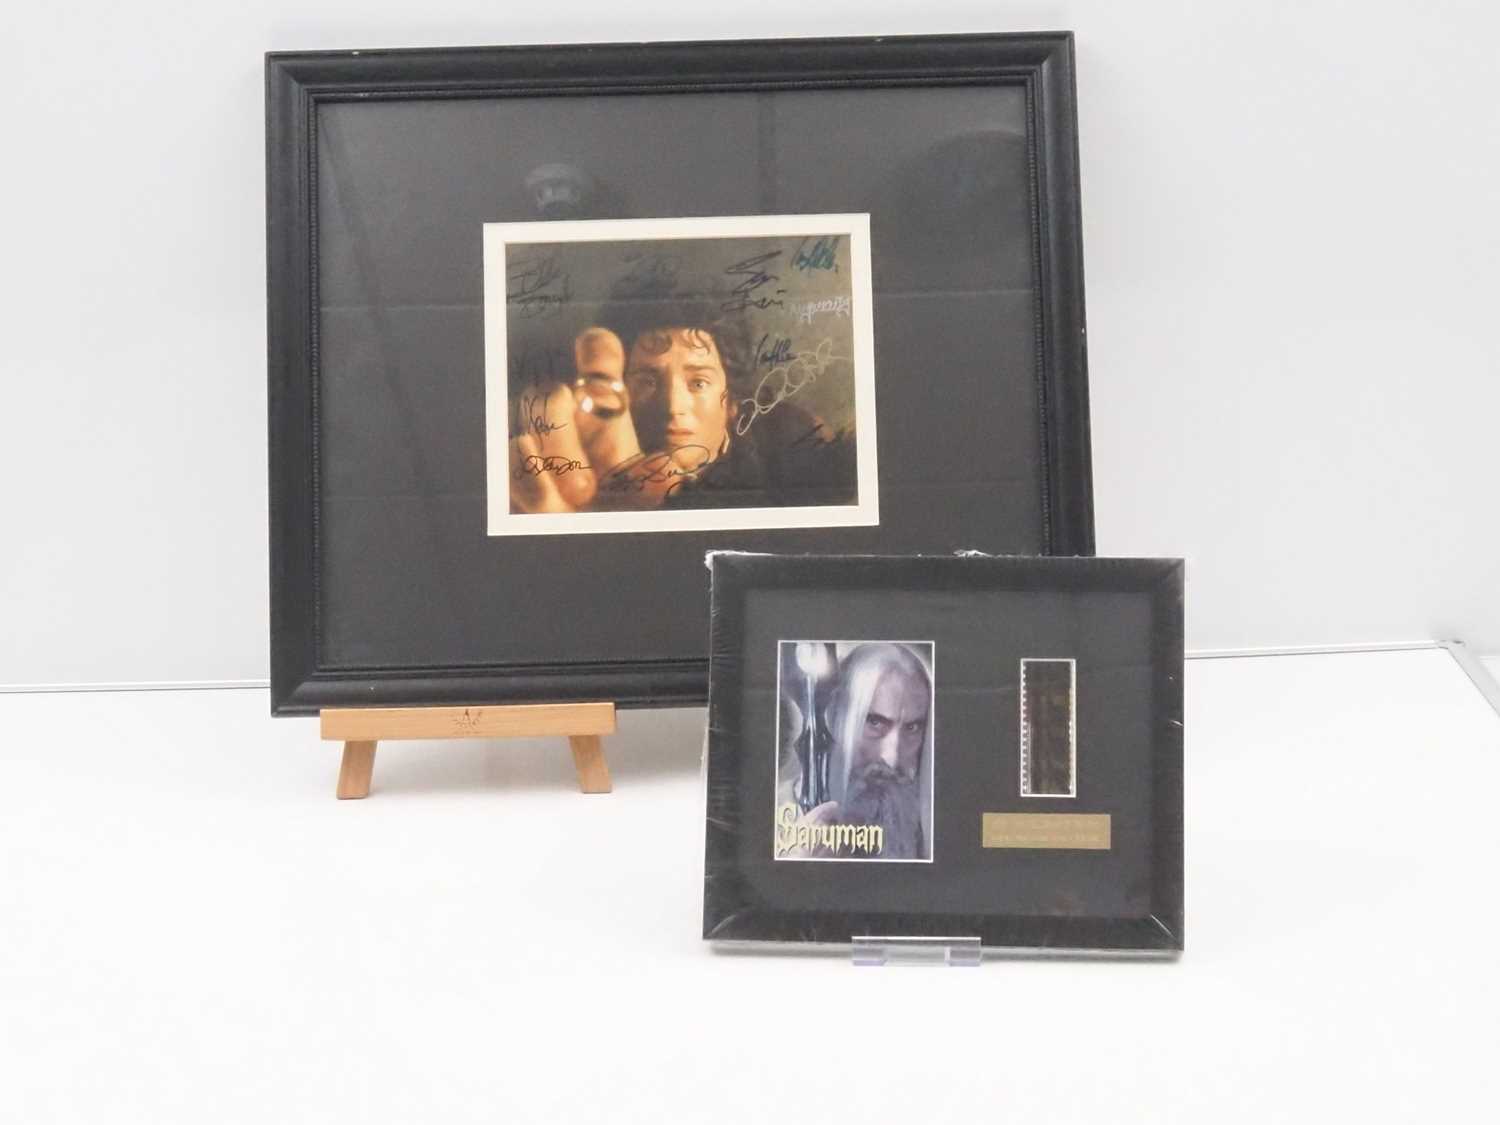 THE LORD OF THE RINGS - THE FELLOWSHIP OF THE RING limited edition mounted film cel display 313/1000